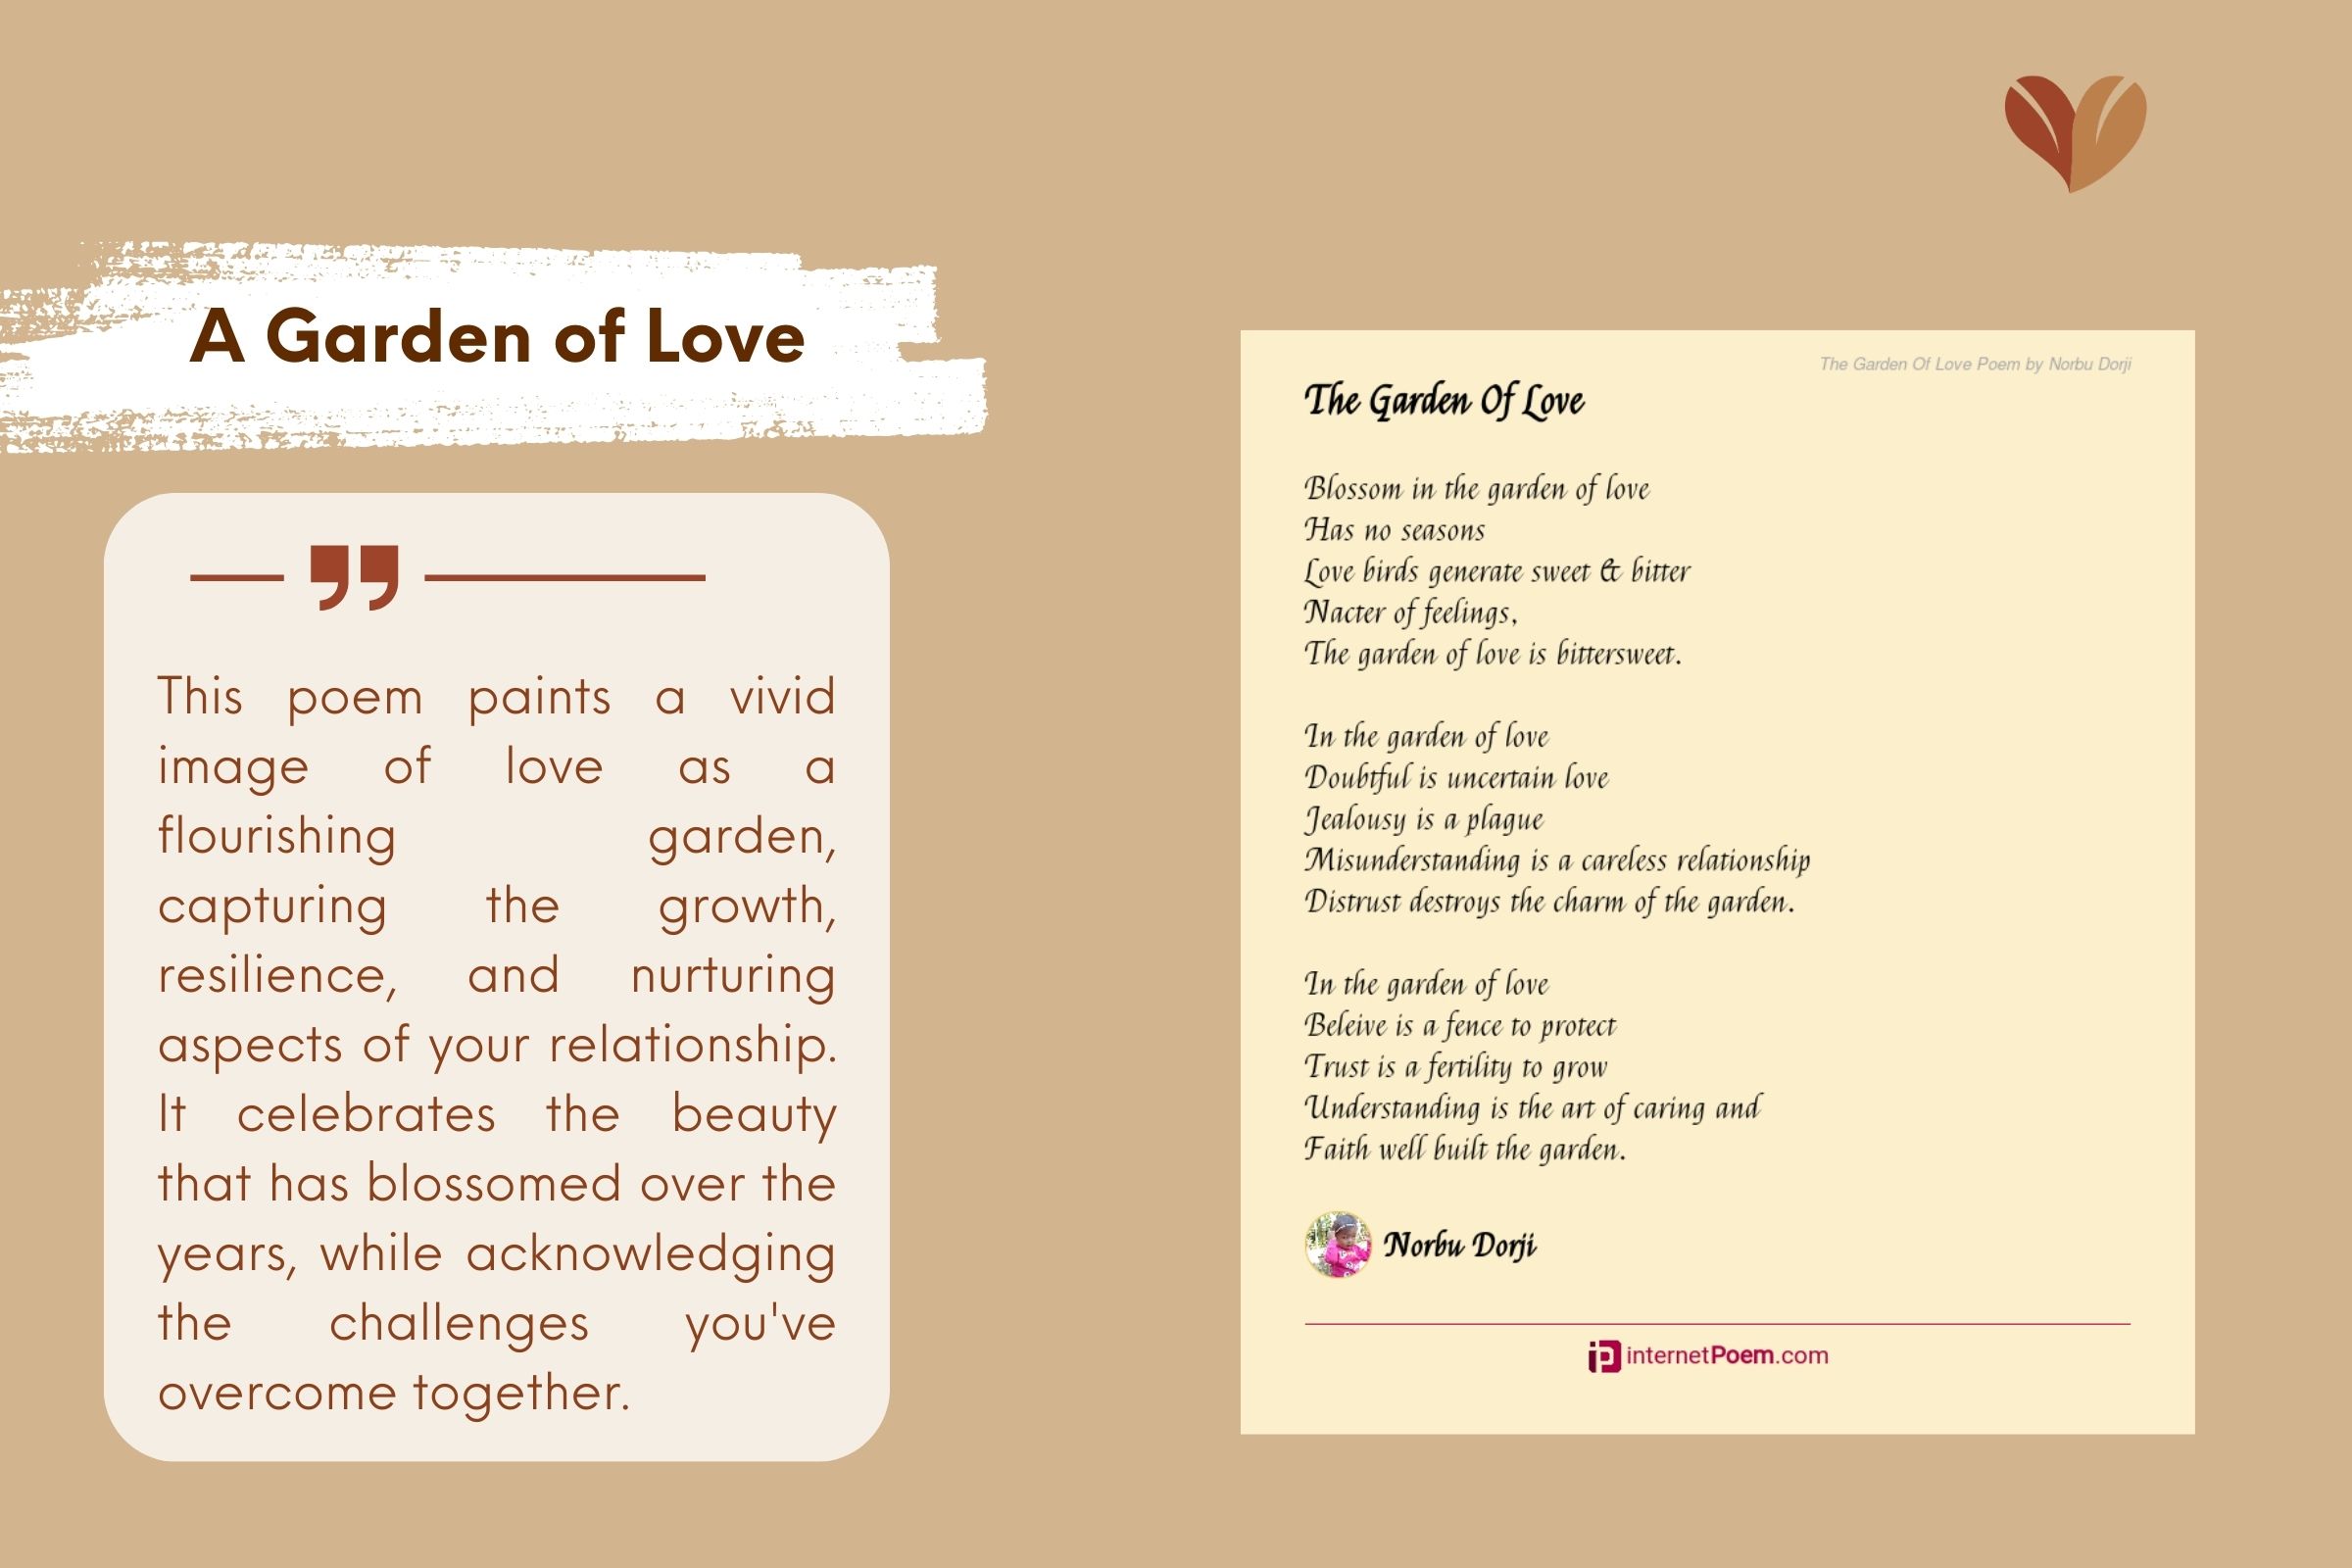 Love poetry garden is the most meaningful gift for her